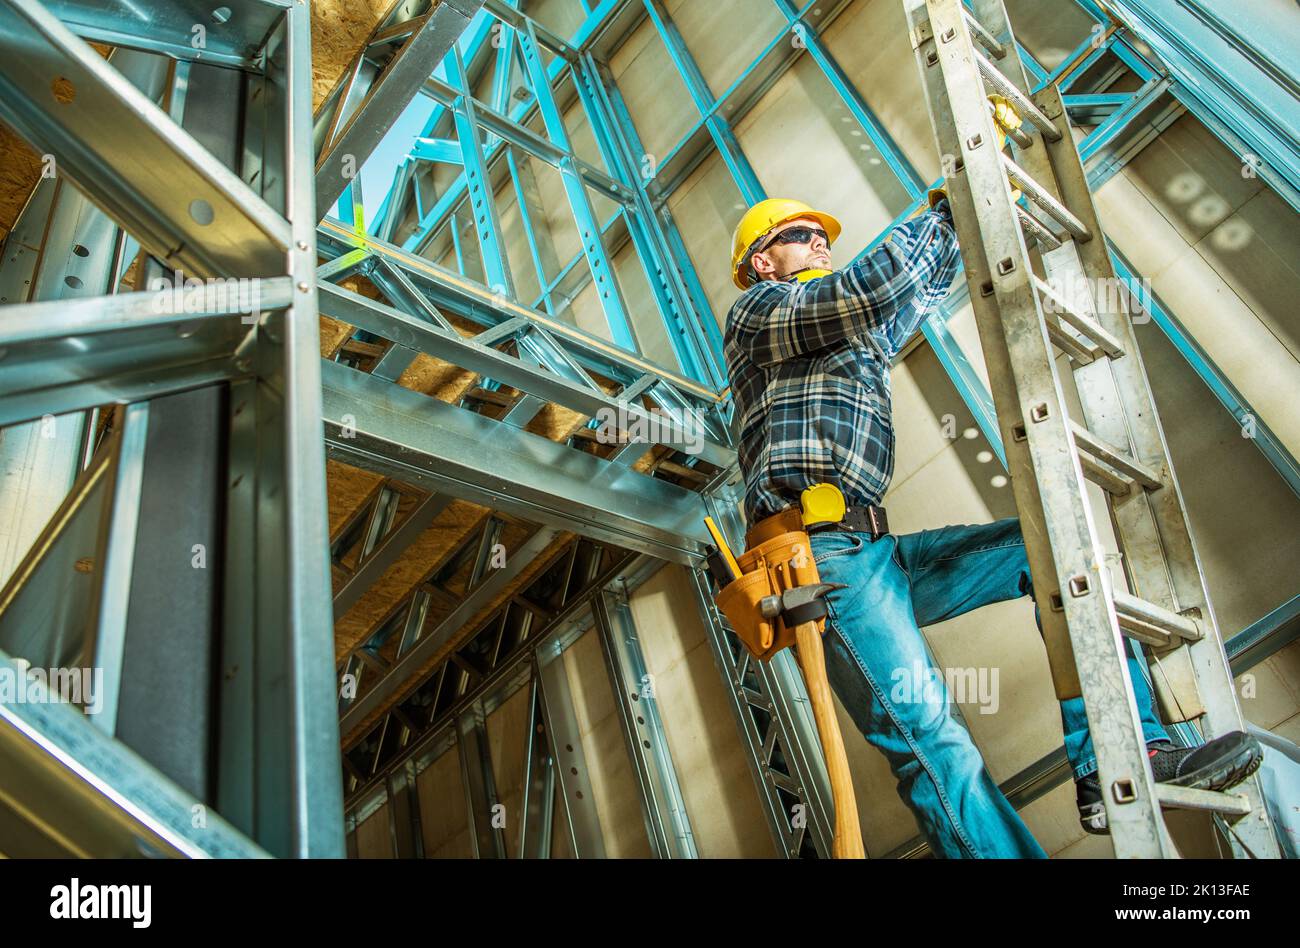 Caucasian Contractor Climbing a Ladder Inside Steel House Frame Construction During Its Development Work. New Commercial Unit Building. Stock Photo